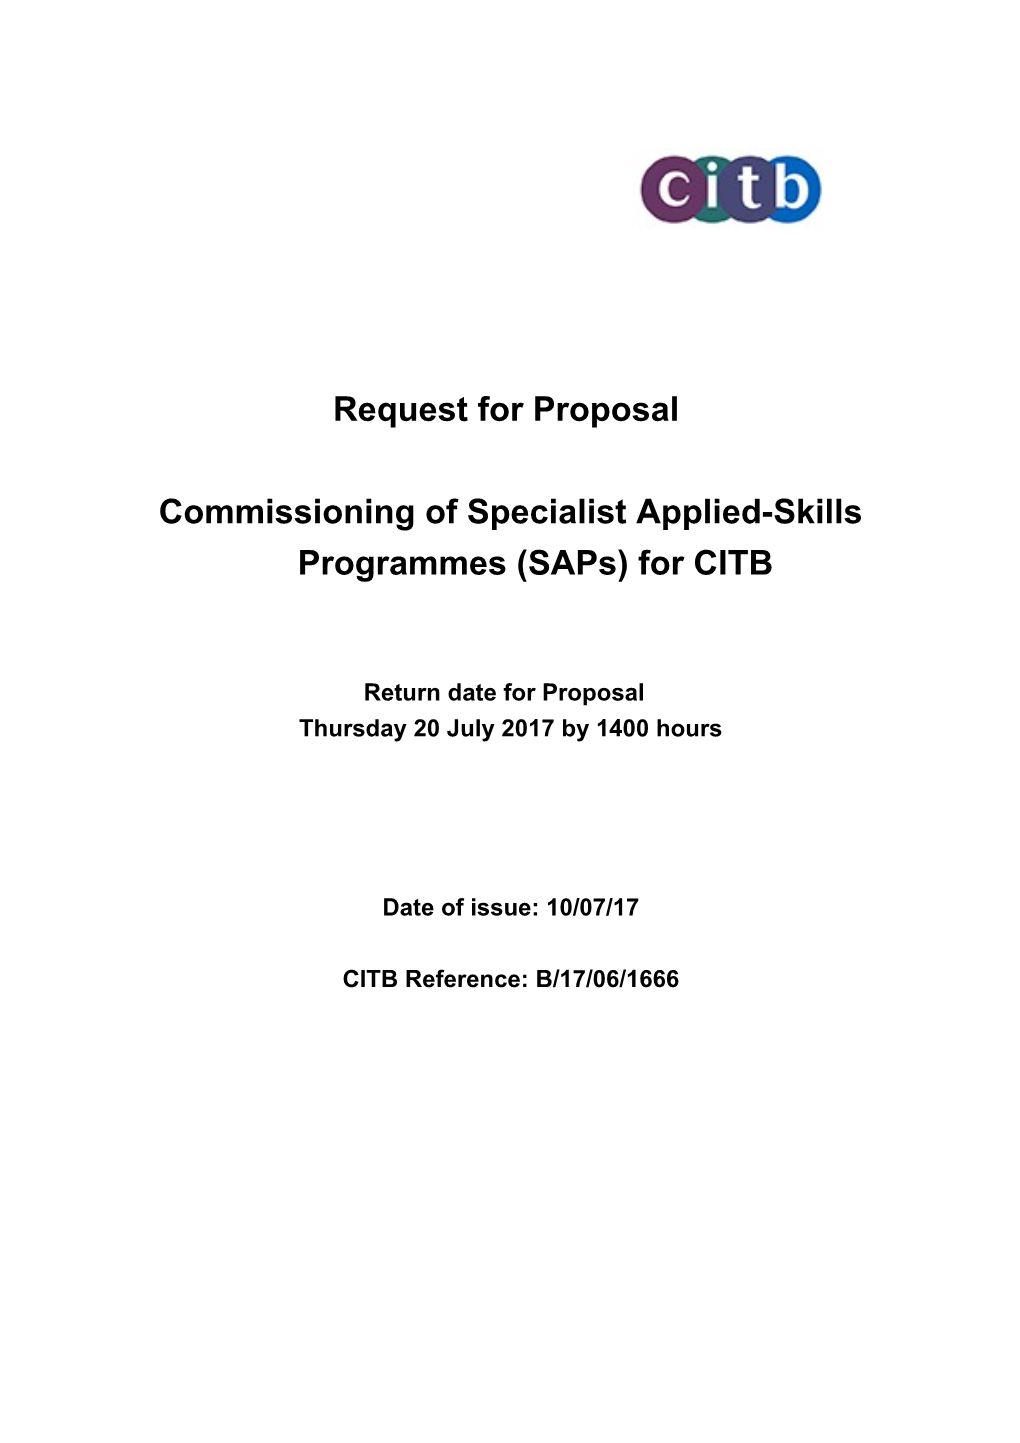 Commissioning of Specialist Applied-Skills Programmes (Saps) for CITB